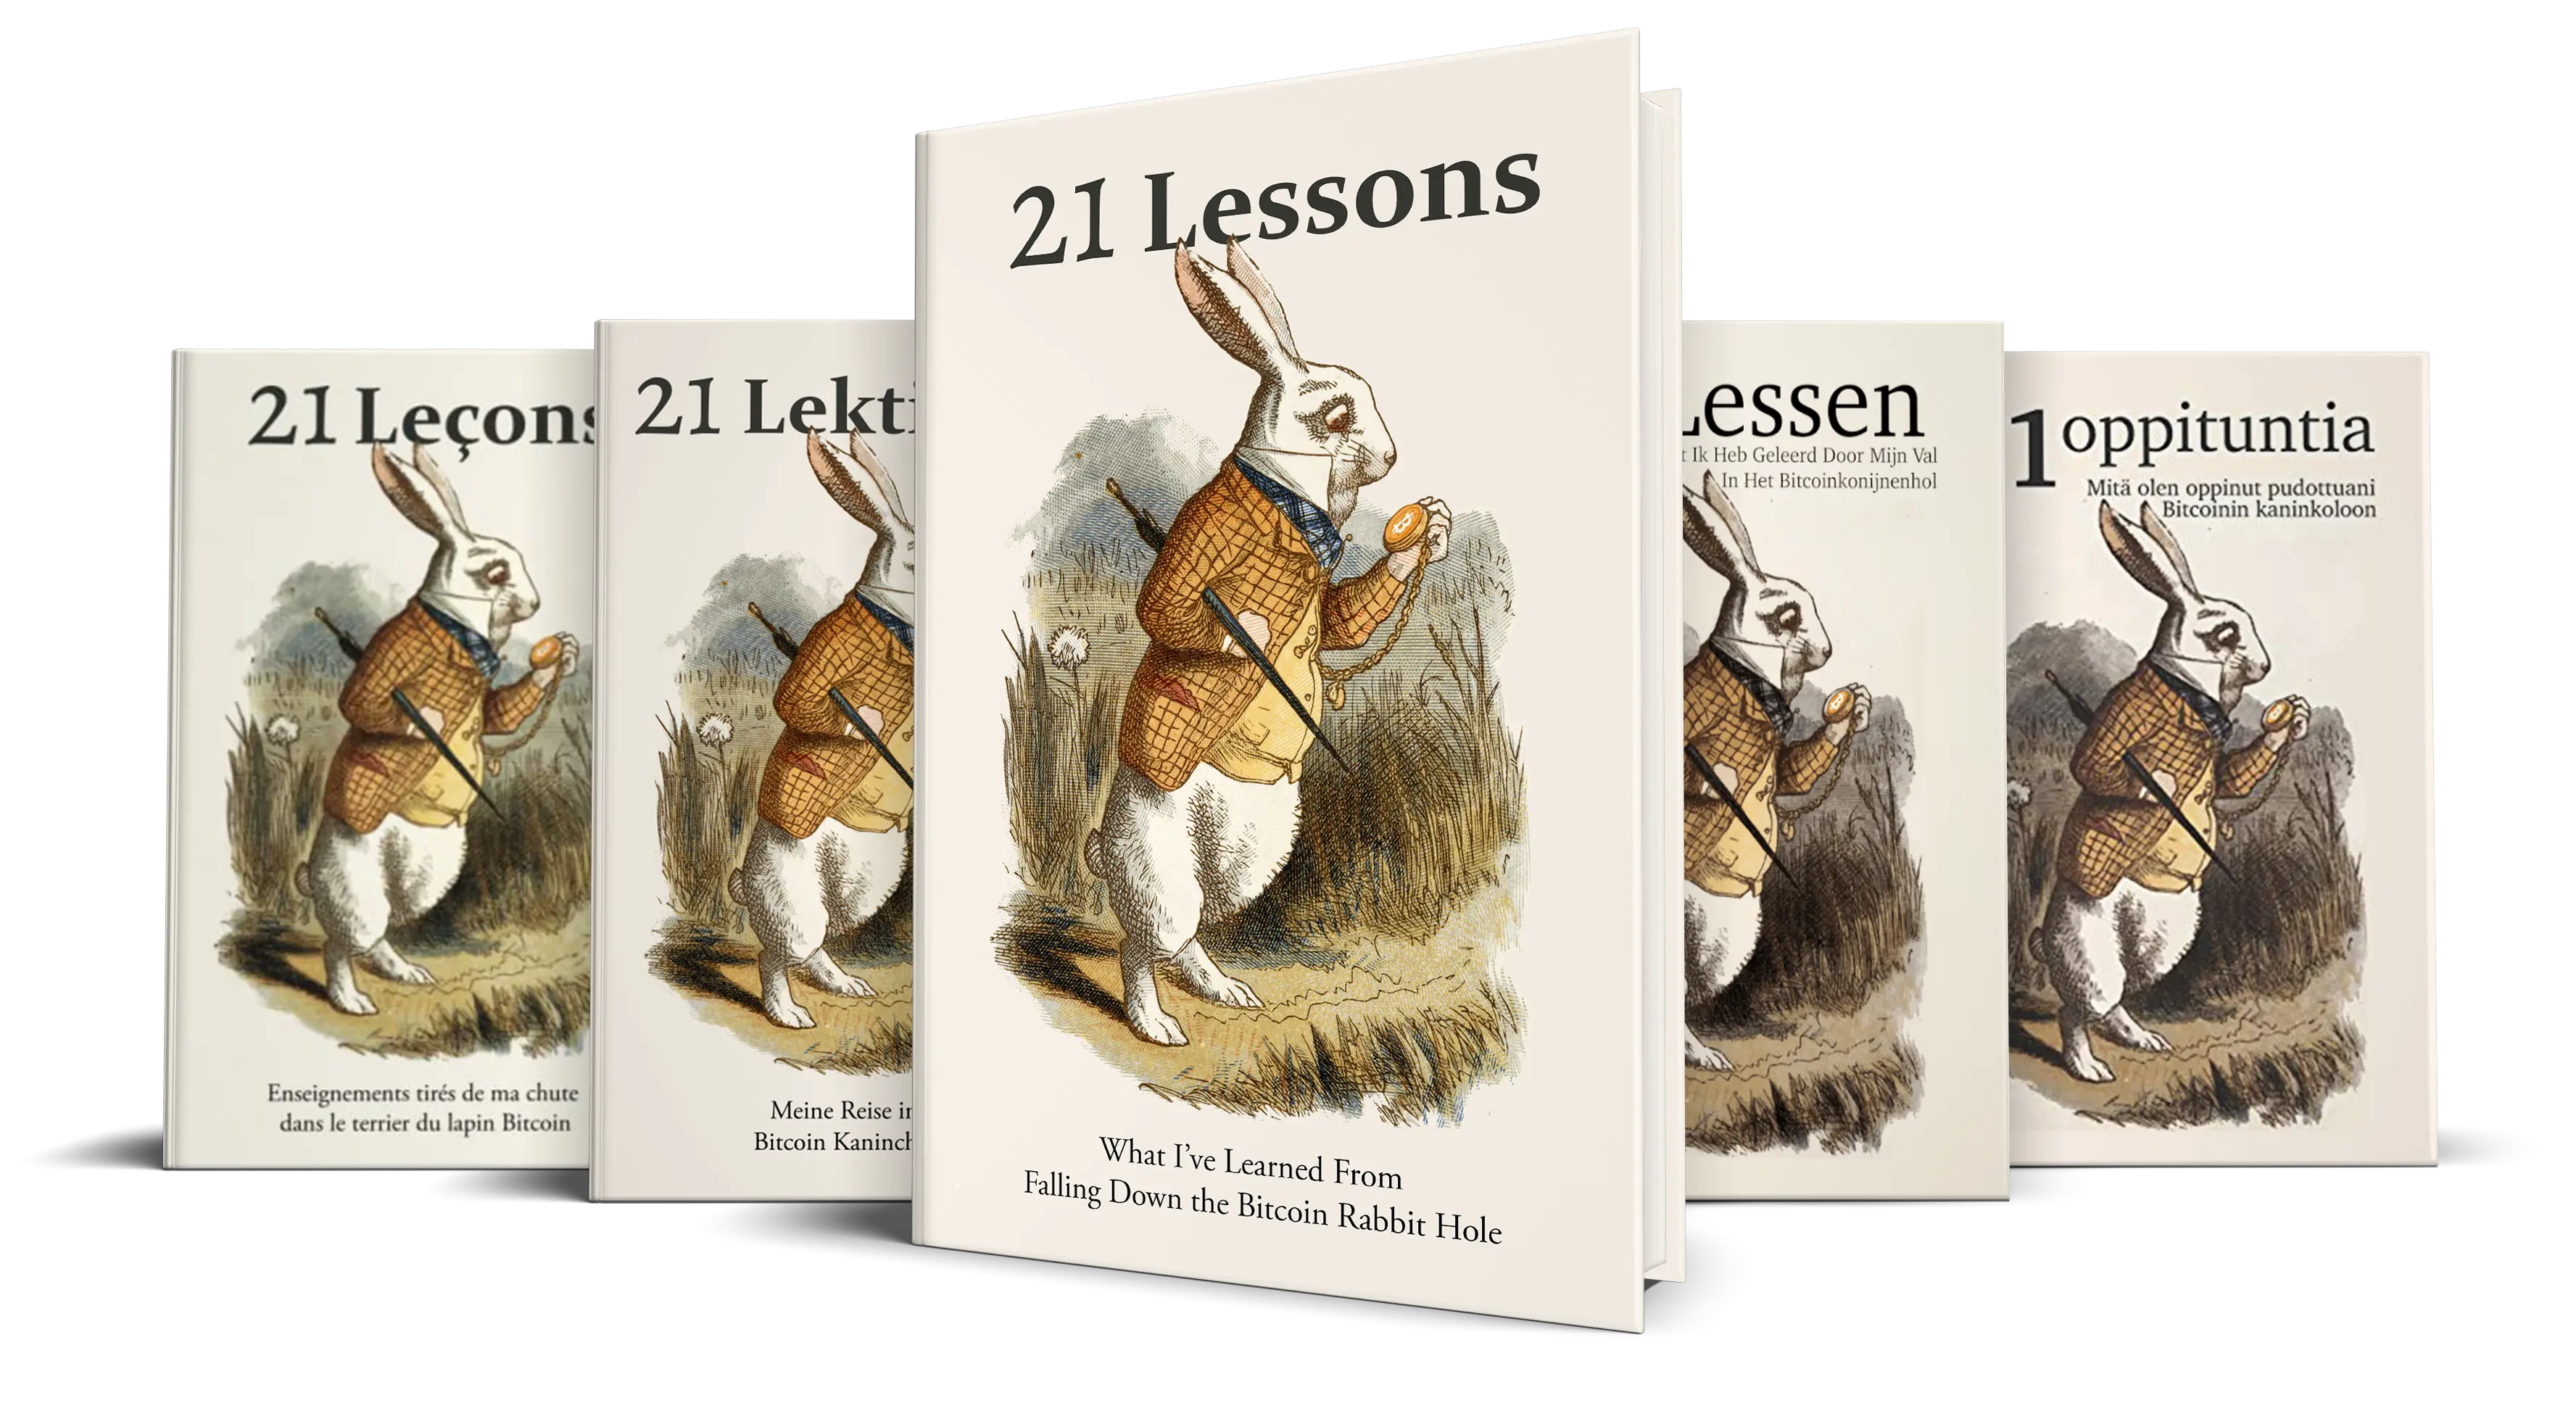 21 Lessons - What I've Learned from Falling Down the Bitcoin Rabbit Hole